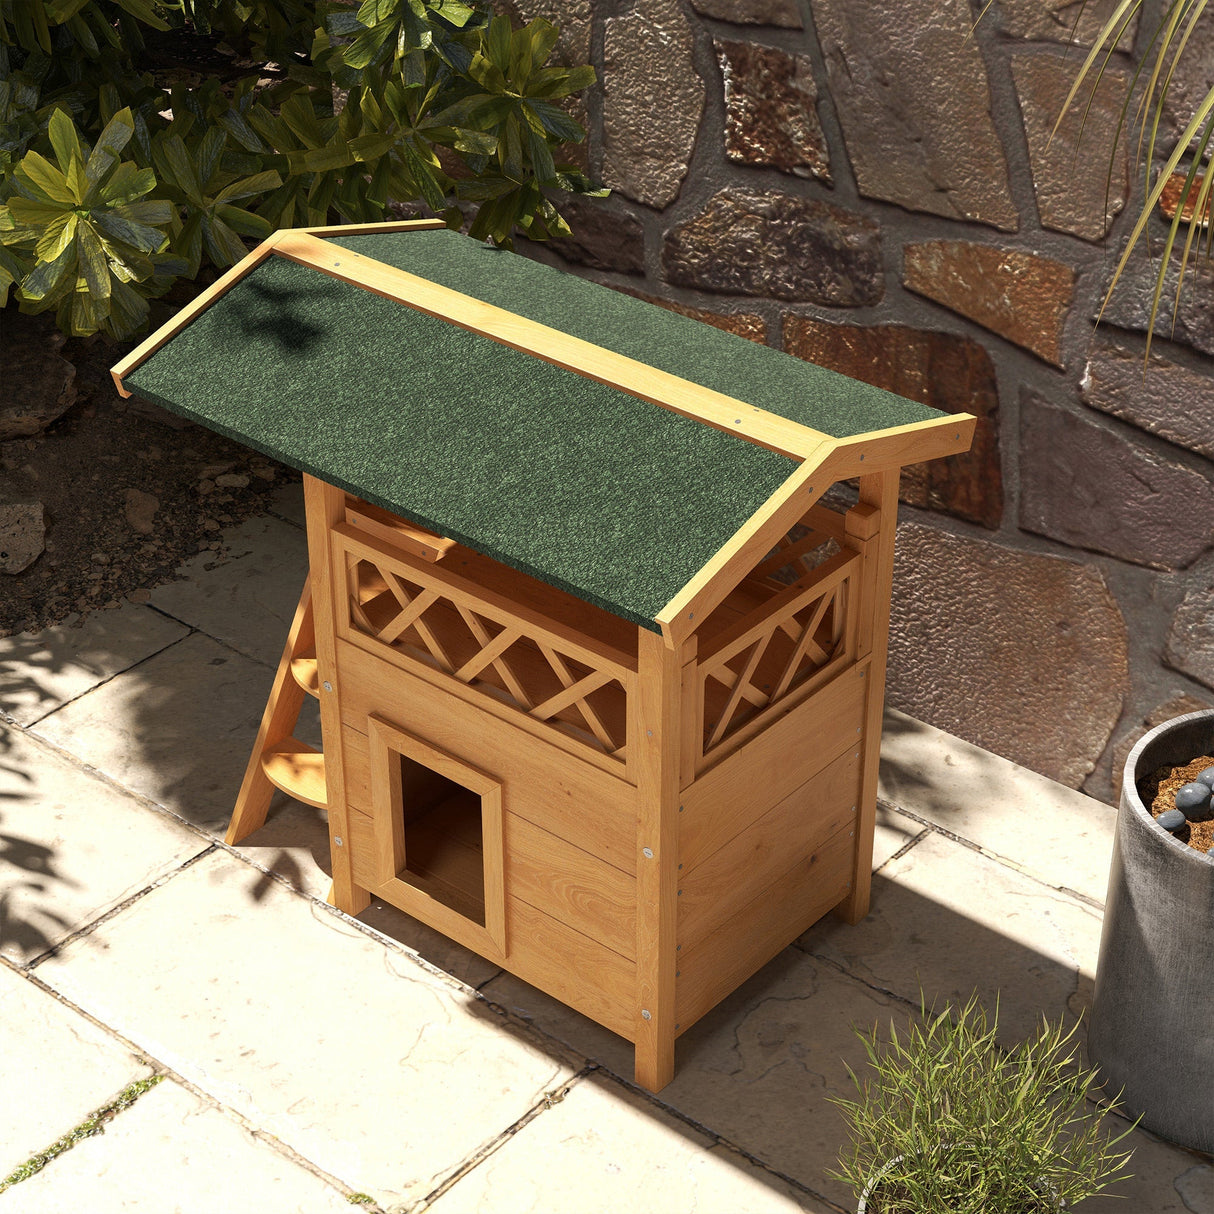 Outdoor Cat House with Balcony & Asphalt Roof | Cats up to 4 kg, PawHut, Natural